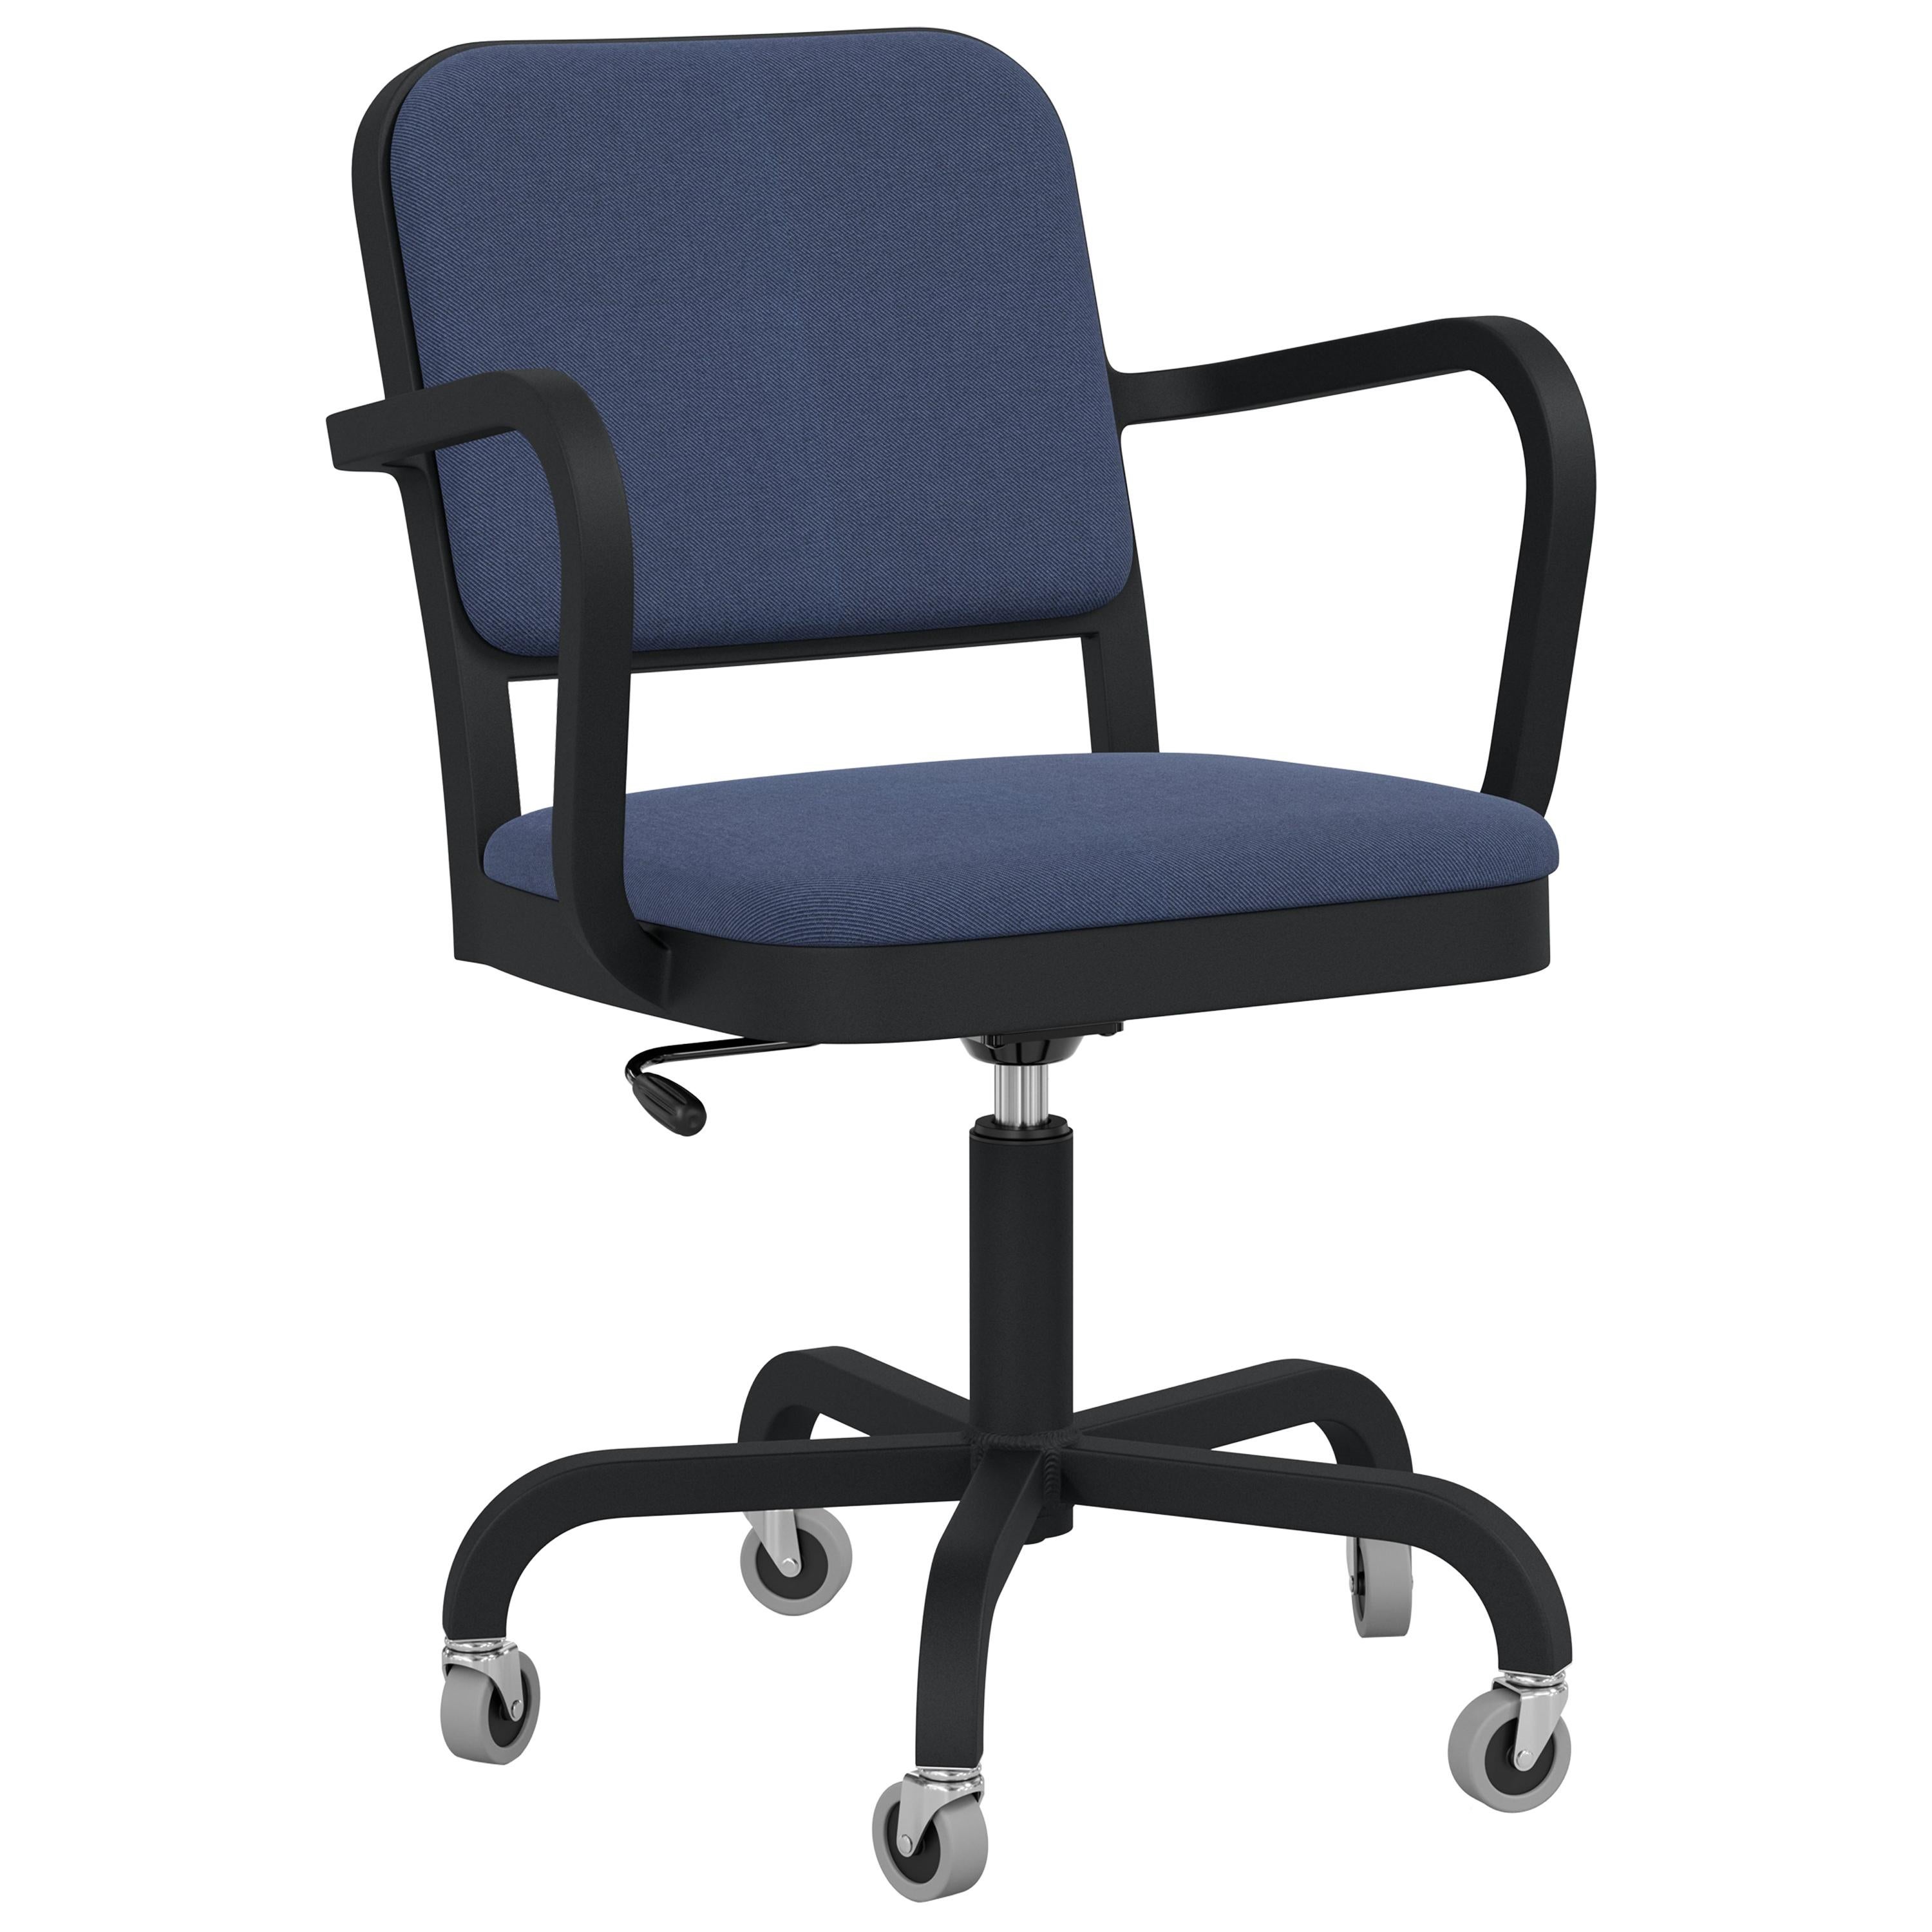 Emeco Navy Officer Swivel Armchair in Navy Blue Fabric with Black Aluminum Frame For Sale